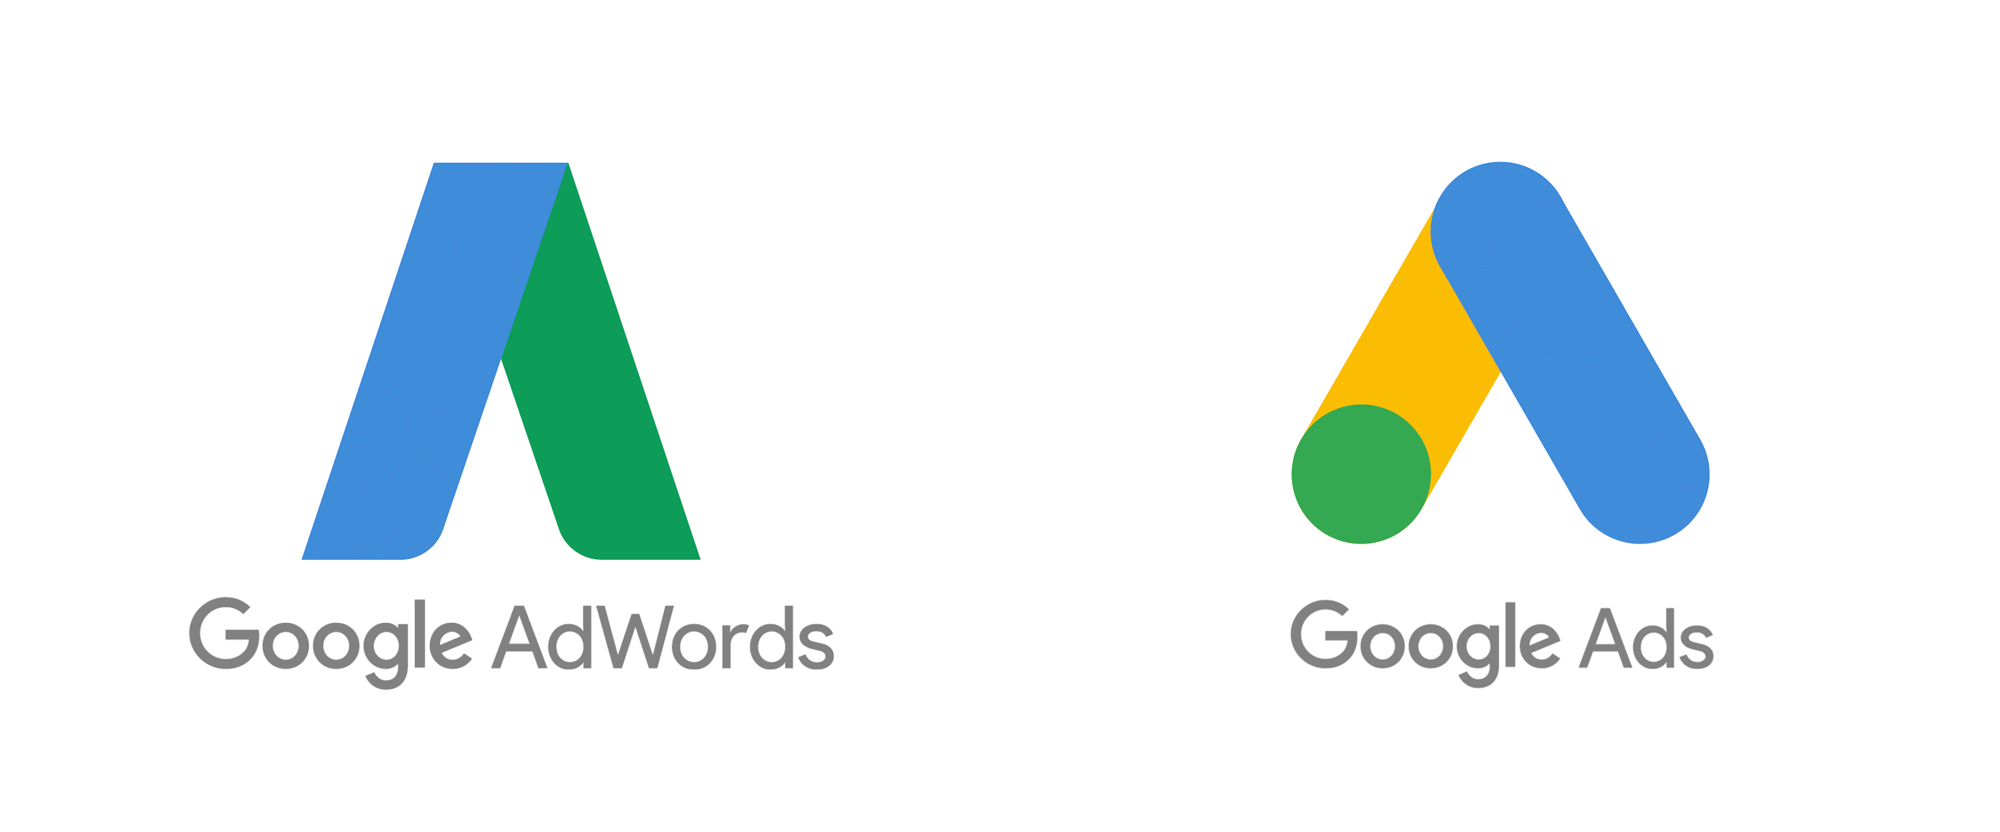 New Name and Logo for Google Ads